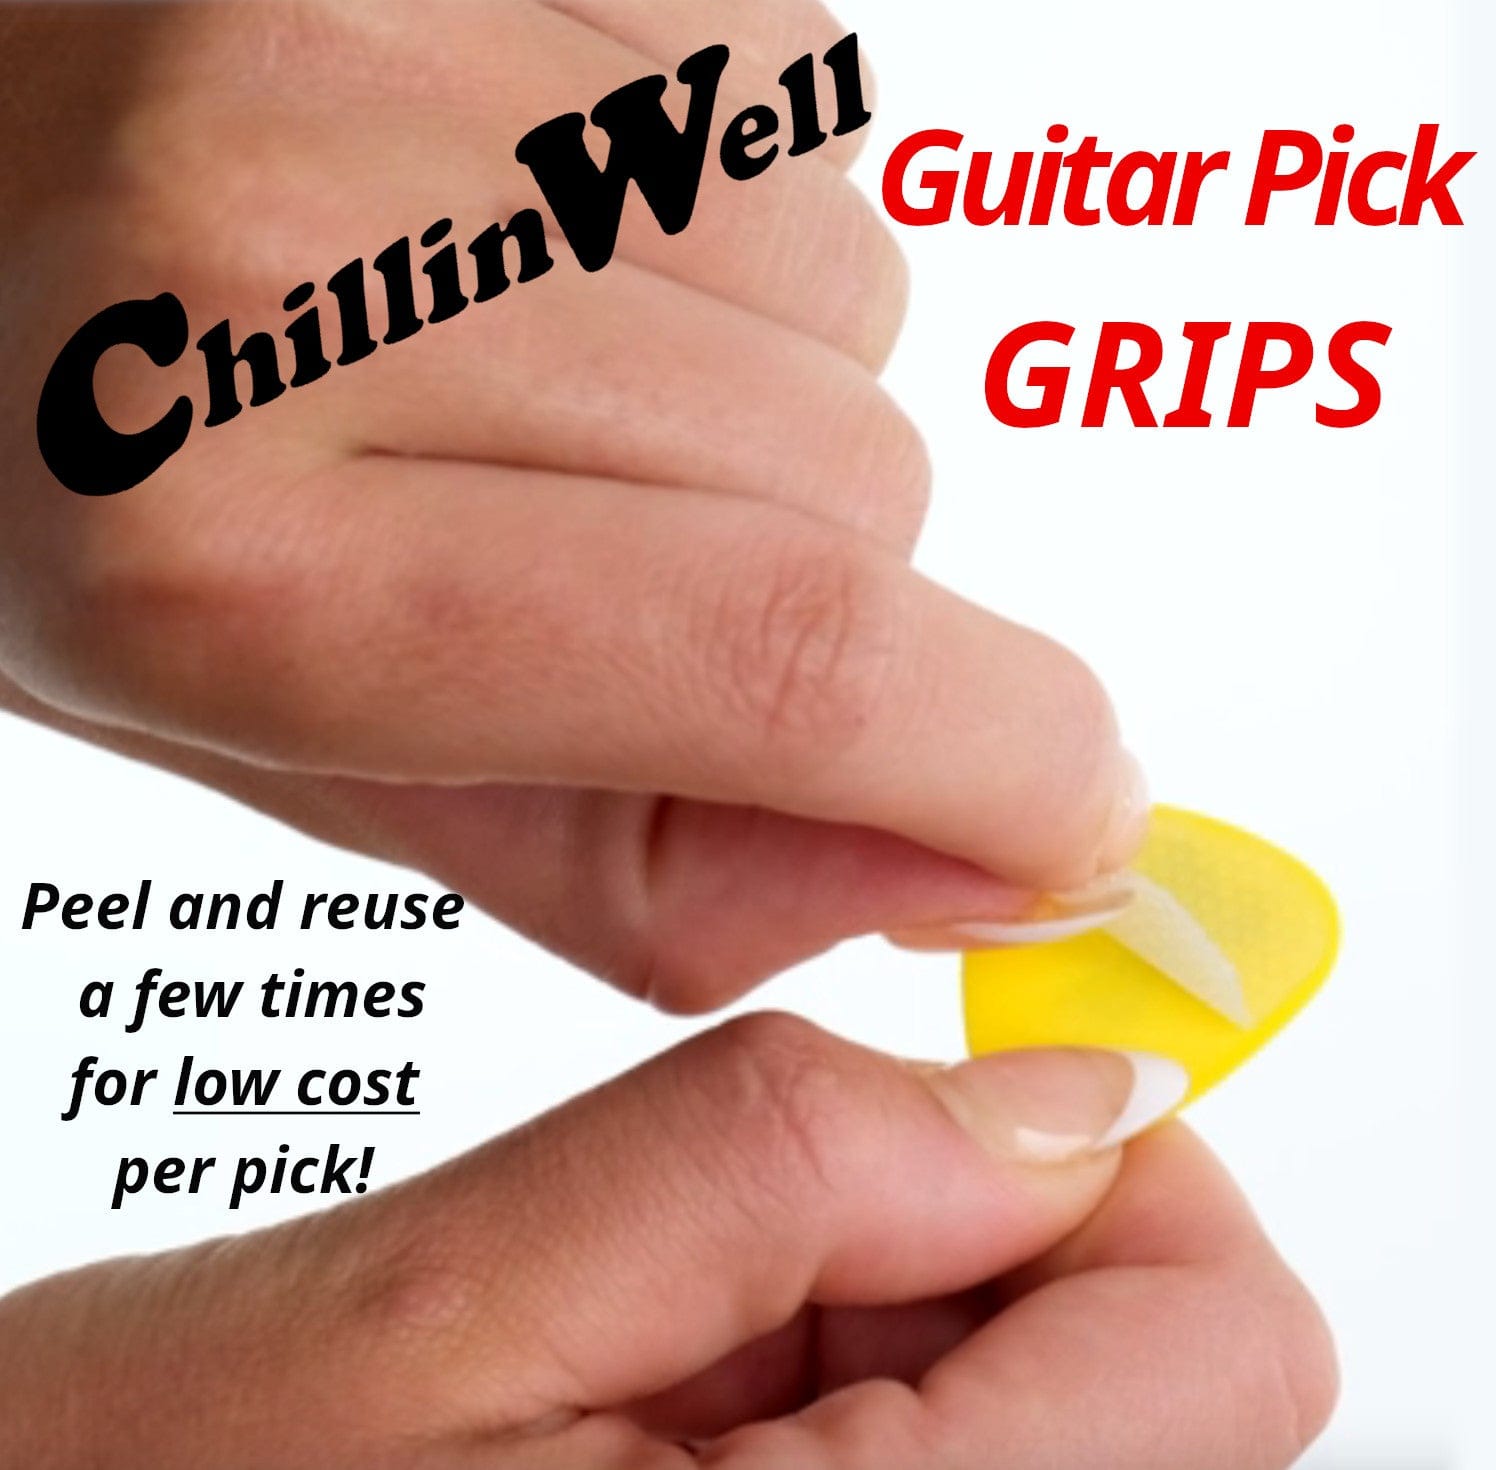 ChillinWell Guitar Pick Grips (16 pc)